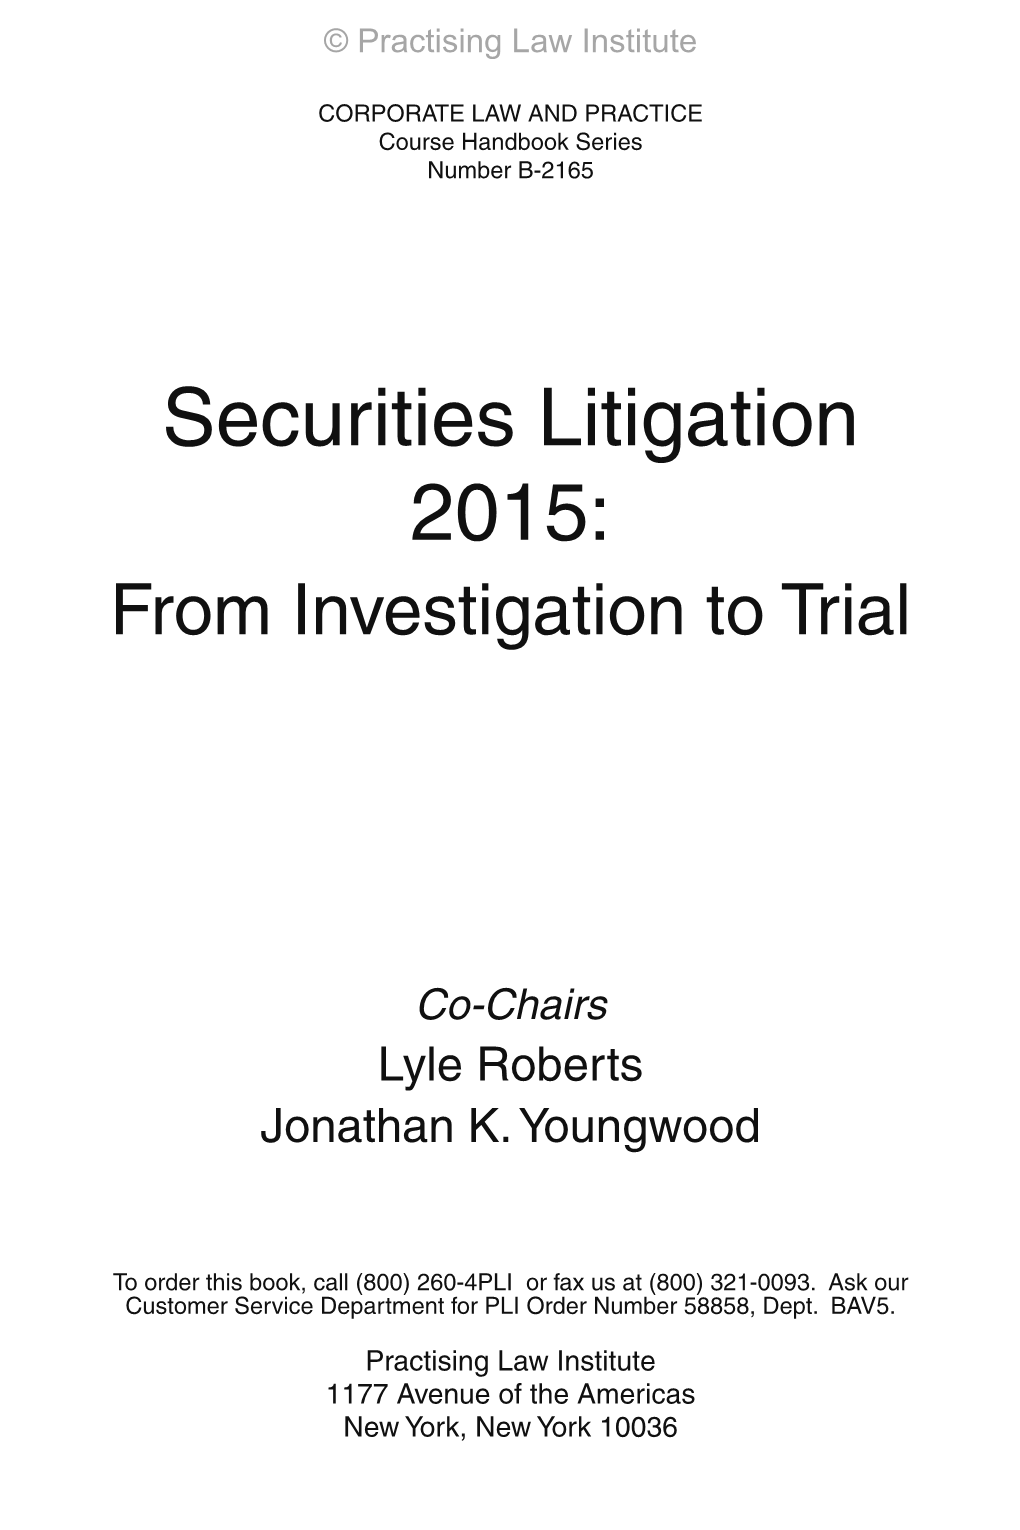 Corporate Scienter and Securities Fraud Liability